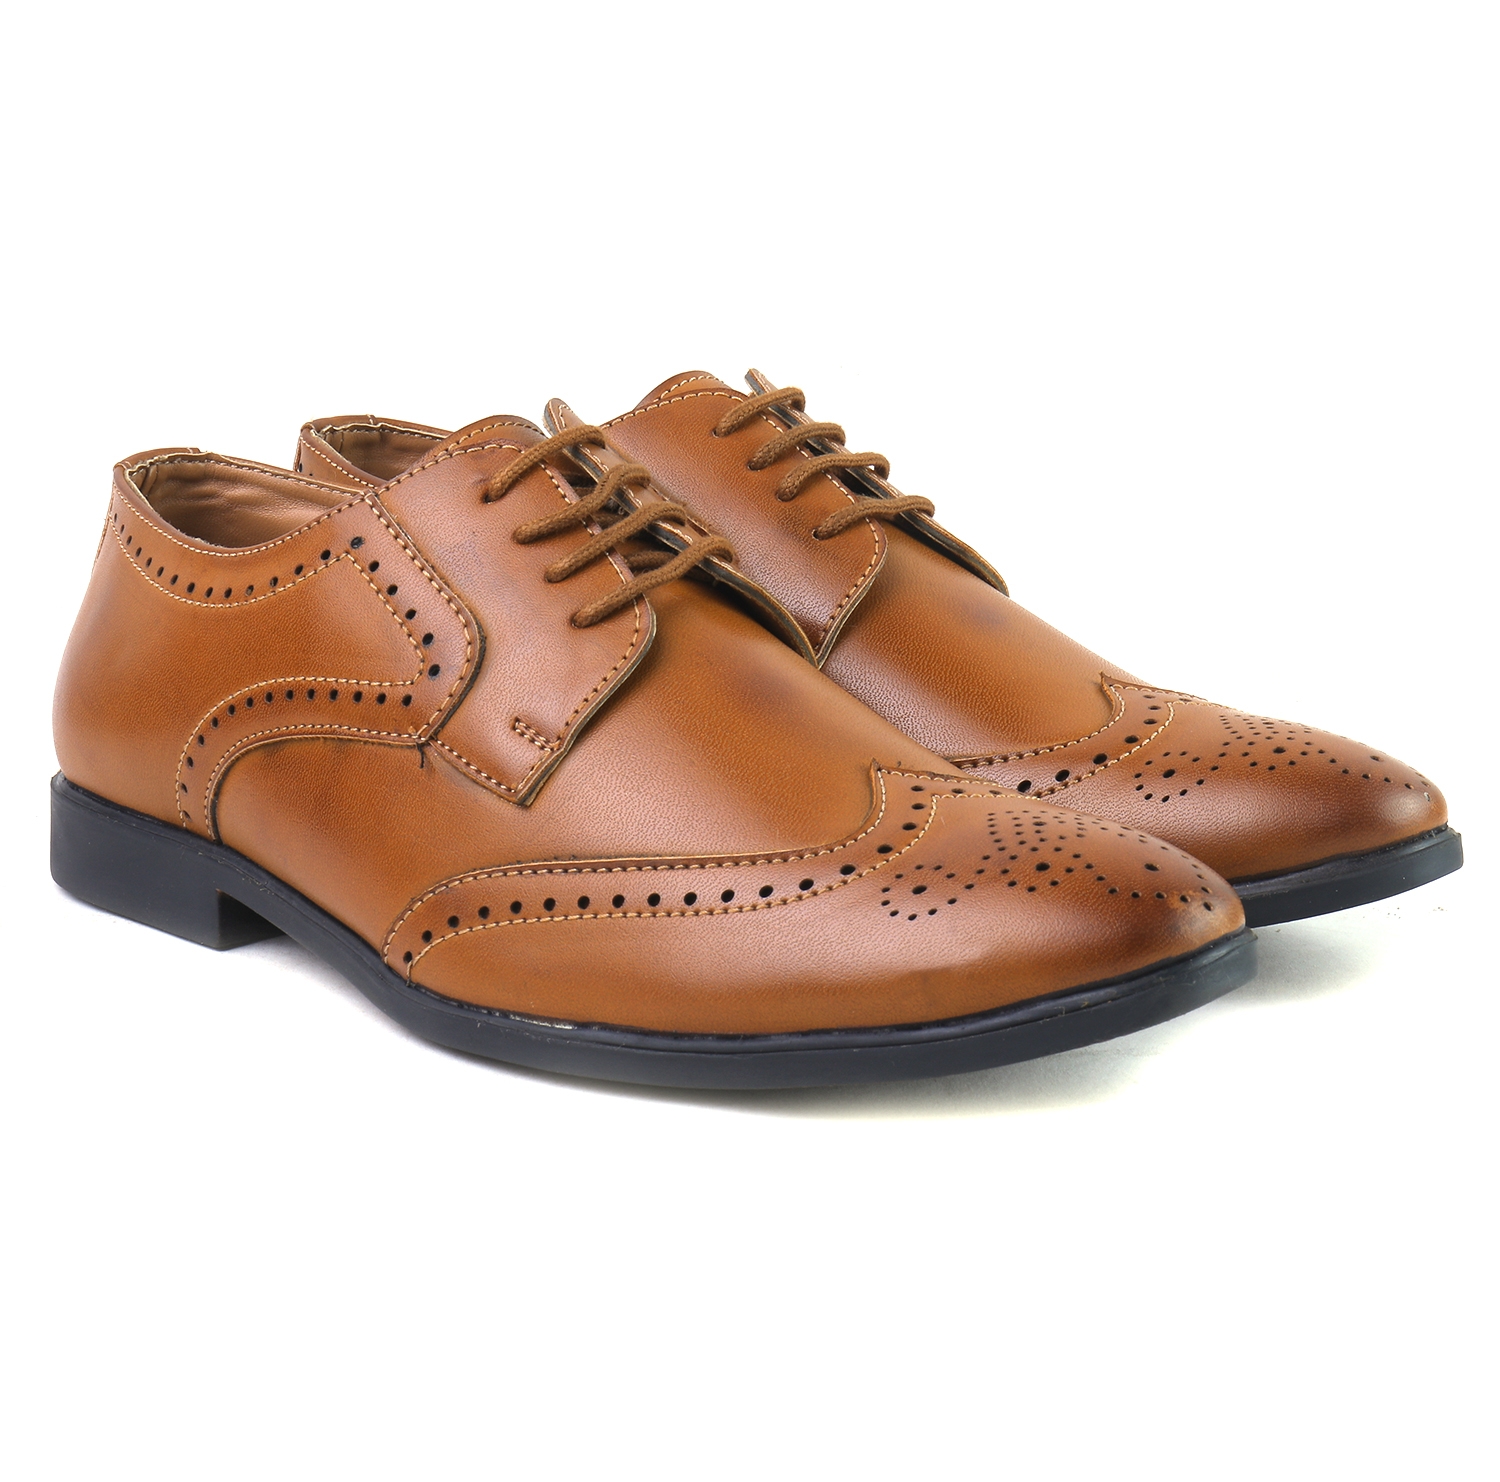 BRATVA | J10 1501 Mens Casual Office Corporate Evening Dress Brogue Shoes for Men in colour Black|Brown|Tan|Cherry 3